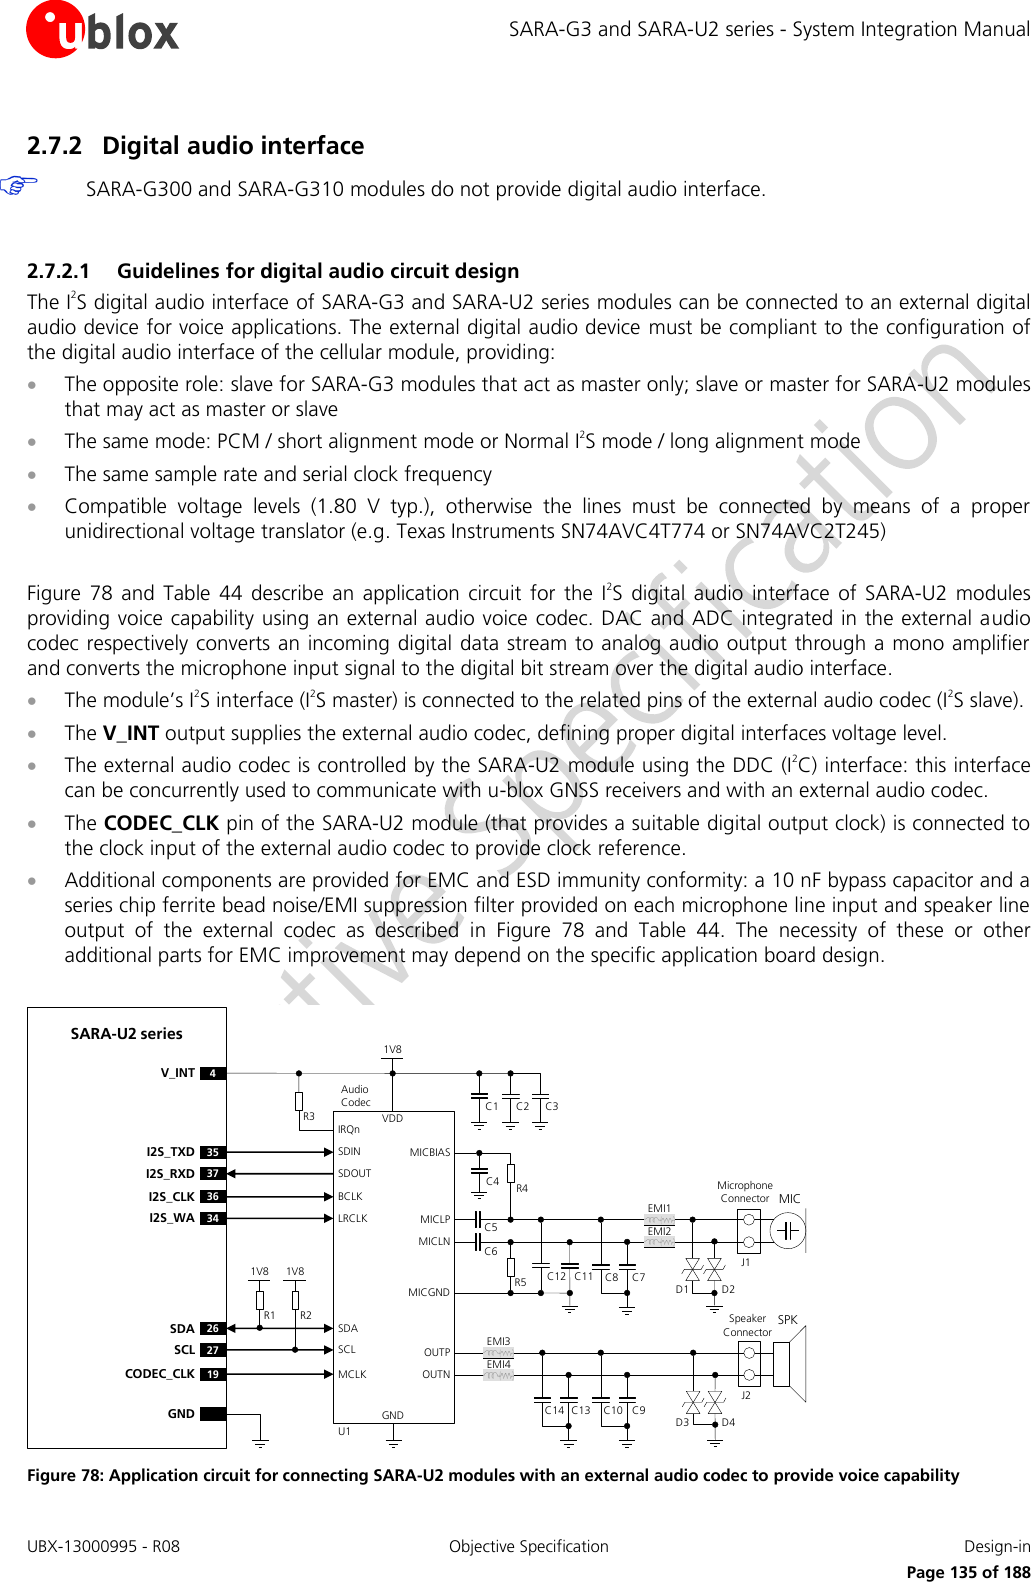 SARA-G3 and SARA-U2 series - System Integration Manual UBX-13000995 - R08  Objective Specification  Design-in     Page 135 of 188 2.7.2 Digital audio interface  SARA-G300 and SARA-G310 modules do not provide digital audio interface.  2.7.2.1 Guidelines for digital audio circuit design The I2S digital audio interface of SARA-G3 and SARA-U2 series modules can be connected to an external digital audio device for voice applications. The external digital audio device  must be compliant to the configuration of the digital audio interface of the cellular module, providing:  The opposite role: slave for SARA-G3 modules that act as master only; slave or master for SARA-U2 modules that may act as master or slave  The same mode: PCM / short alignment mode or Normal I2S mode / long alignment mode  The same sample rate and serial clock frequency  Compatible  voltage  levels  (1.80  V  typ.),  otherwise  the  lines  must  be  connected  by  means  of  a  proper unidirectional voltage translator (e.g. Texas Instruments SN74AVC4T774 or SN74AVC2T245)  Figure  78  and  Table  44 describe  an  application  circuit  for  the  I2S  digital audio  interface  of  SARA-U2  modules providing voice capability using an external audio voice codec. DAC and ADC integrated in the external audio codec respectively converts an incoming digital  data stream to analog audio output through a mono amplifier and converts the microphone input signal to the digital bit stream over the digital audio interface.  The module’s I2S interface (I2S master) is connected to the related pins of the external audio codec (I2S slave).  The V_INT output supplies the external audio codec, defining proper digital interfaces voltage level.  The external audio codec is controlled by the SARA-U2 module using the DDC (I2C) interface: this interface can be concurrently used to communicate with u-blox GNSS receivers and with an external audio codec.  The CODEC_CLK pin of the SARA-U2 module (that provides a suitable digital output clock) is connected to the clock input of the external audio codec to provide clock reference.  Additional components are provided for EMC and ESD immunity conformity: a 10 nF bypass capacitor and a series chip ferrite bead noise/EMI suppression filter provided on each microphone line input and speaker line output  of  the  external  codec  as  described  in  Figure  78  and  Table  44.  The  necessity  of  these  or  other additional parts for EMC improvement may depend on the specific application board design.  R2R1GNDU1SARA-U2 seriesAudio   Codec26SDA27SCLSDASCL19CODEC_CLK MCLKGNDR3 C3C2C14V_INTVDD1V8MICBIASC4 R4C5C6EMI1MICLNMICLPMicrophone ConnectorEMI2MICC12 C11J1MICGNDR5 C8 C7SPKSpeaker ConnectorOUTPOUTNJ2C10 C9C14 C13EMI3EMI4IRQnBCLKLRCLKSDINSDOUT36I2S_CLK34I2S_WA35I2S_TXD37I2S_RXD1V81V8D3D1D4D2 Figure 78: Application circuit for connecting SARA-U2 modules with an external audio codec to provide voice capability 